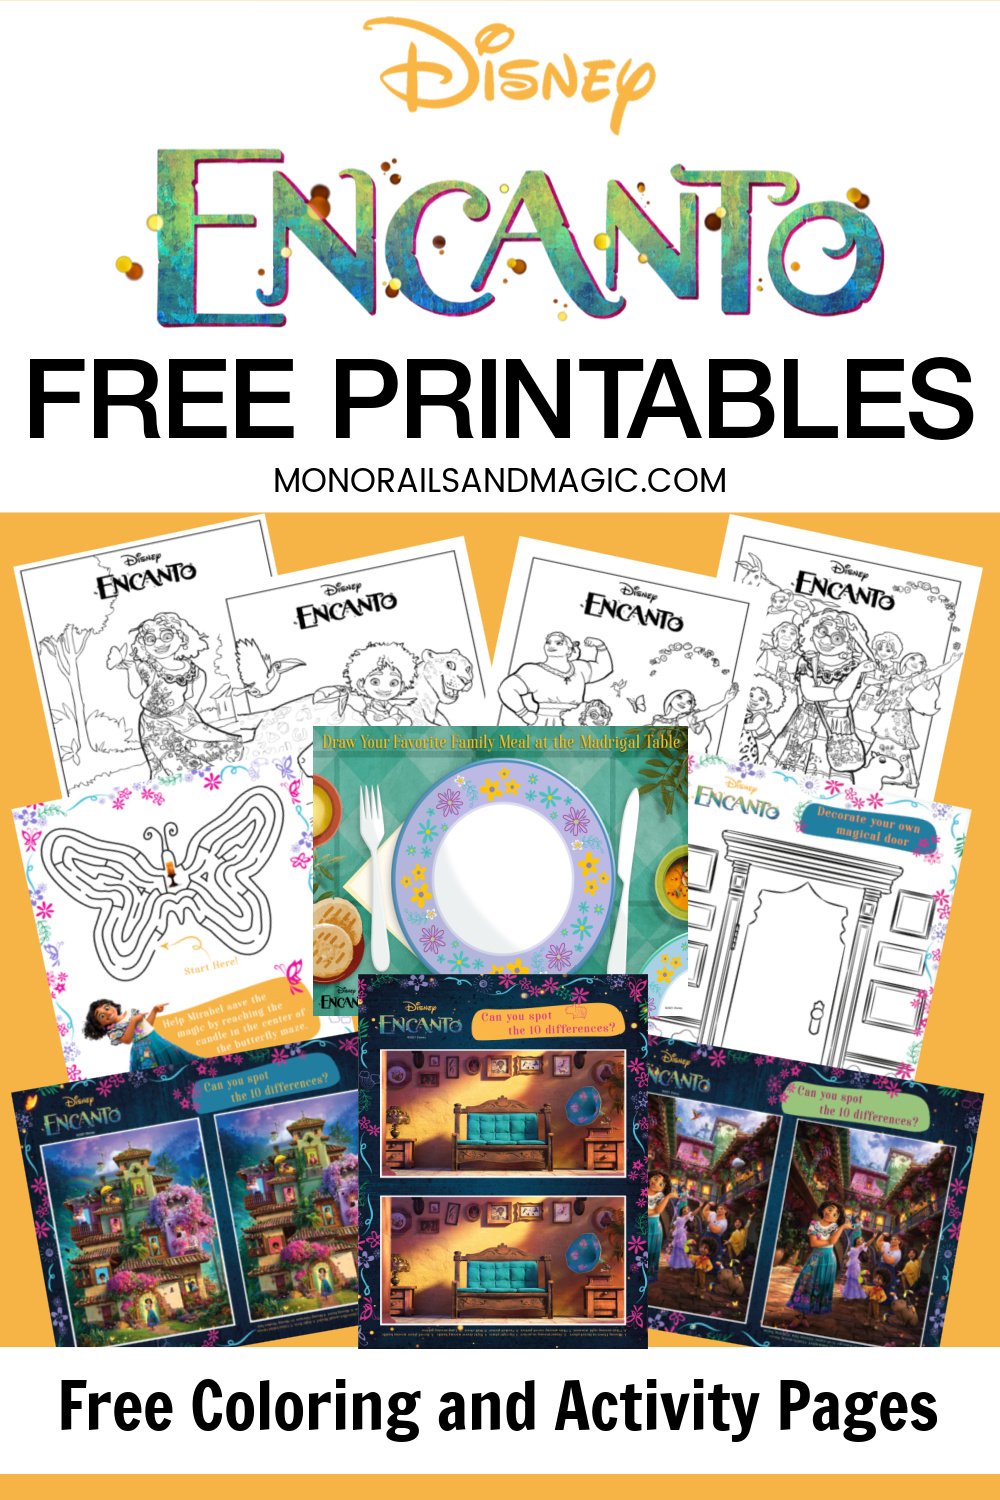 Free printable coloring and activity pages for Disney's Encanto.